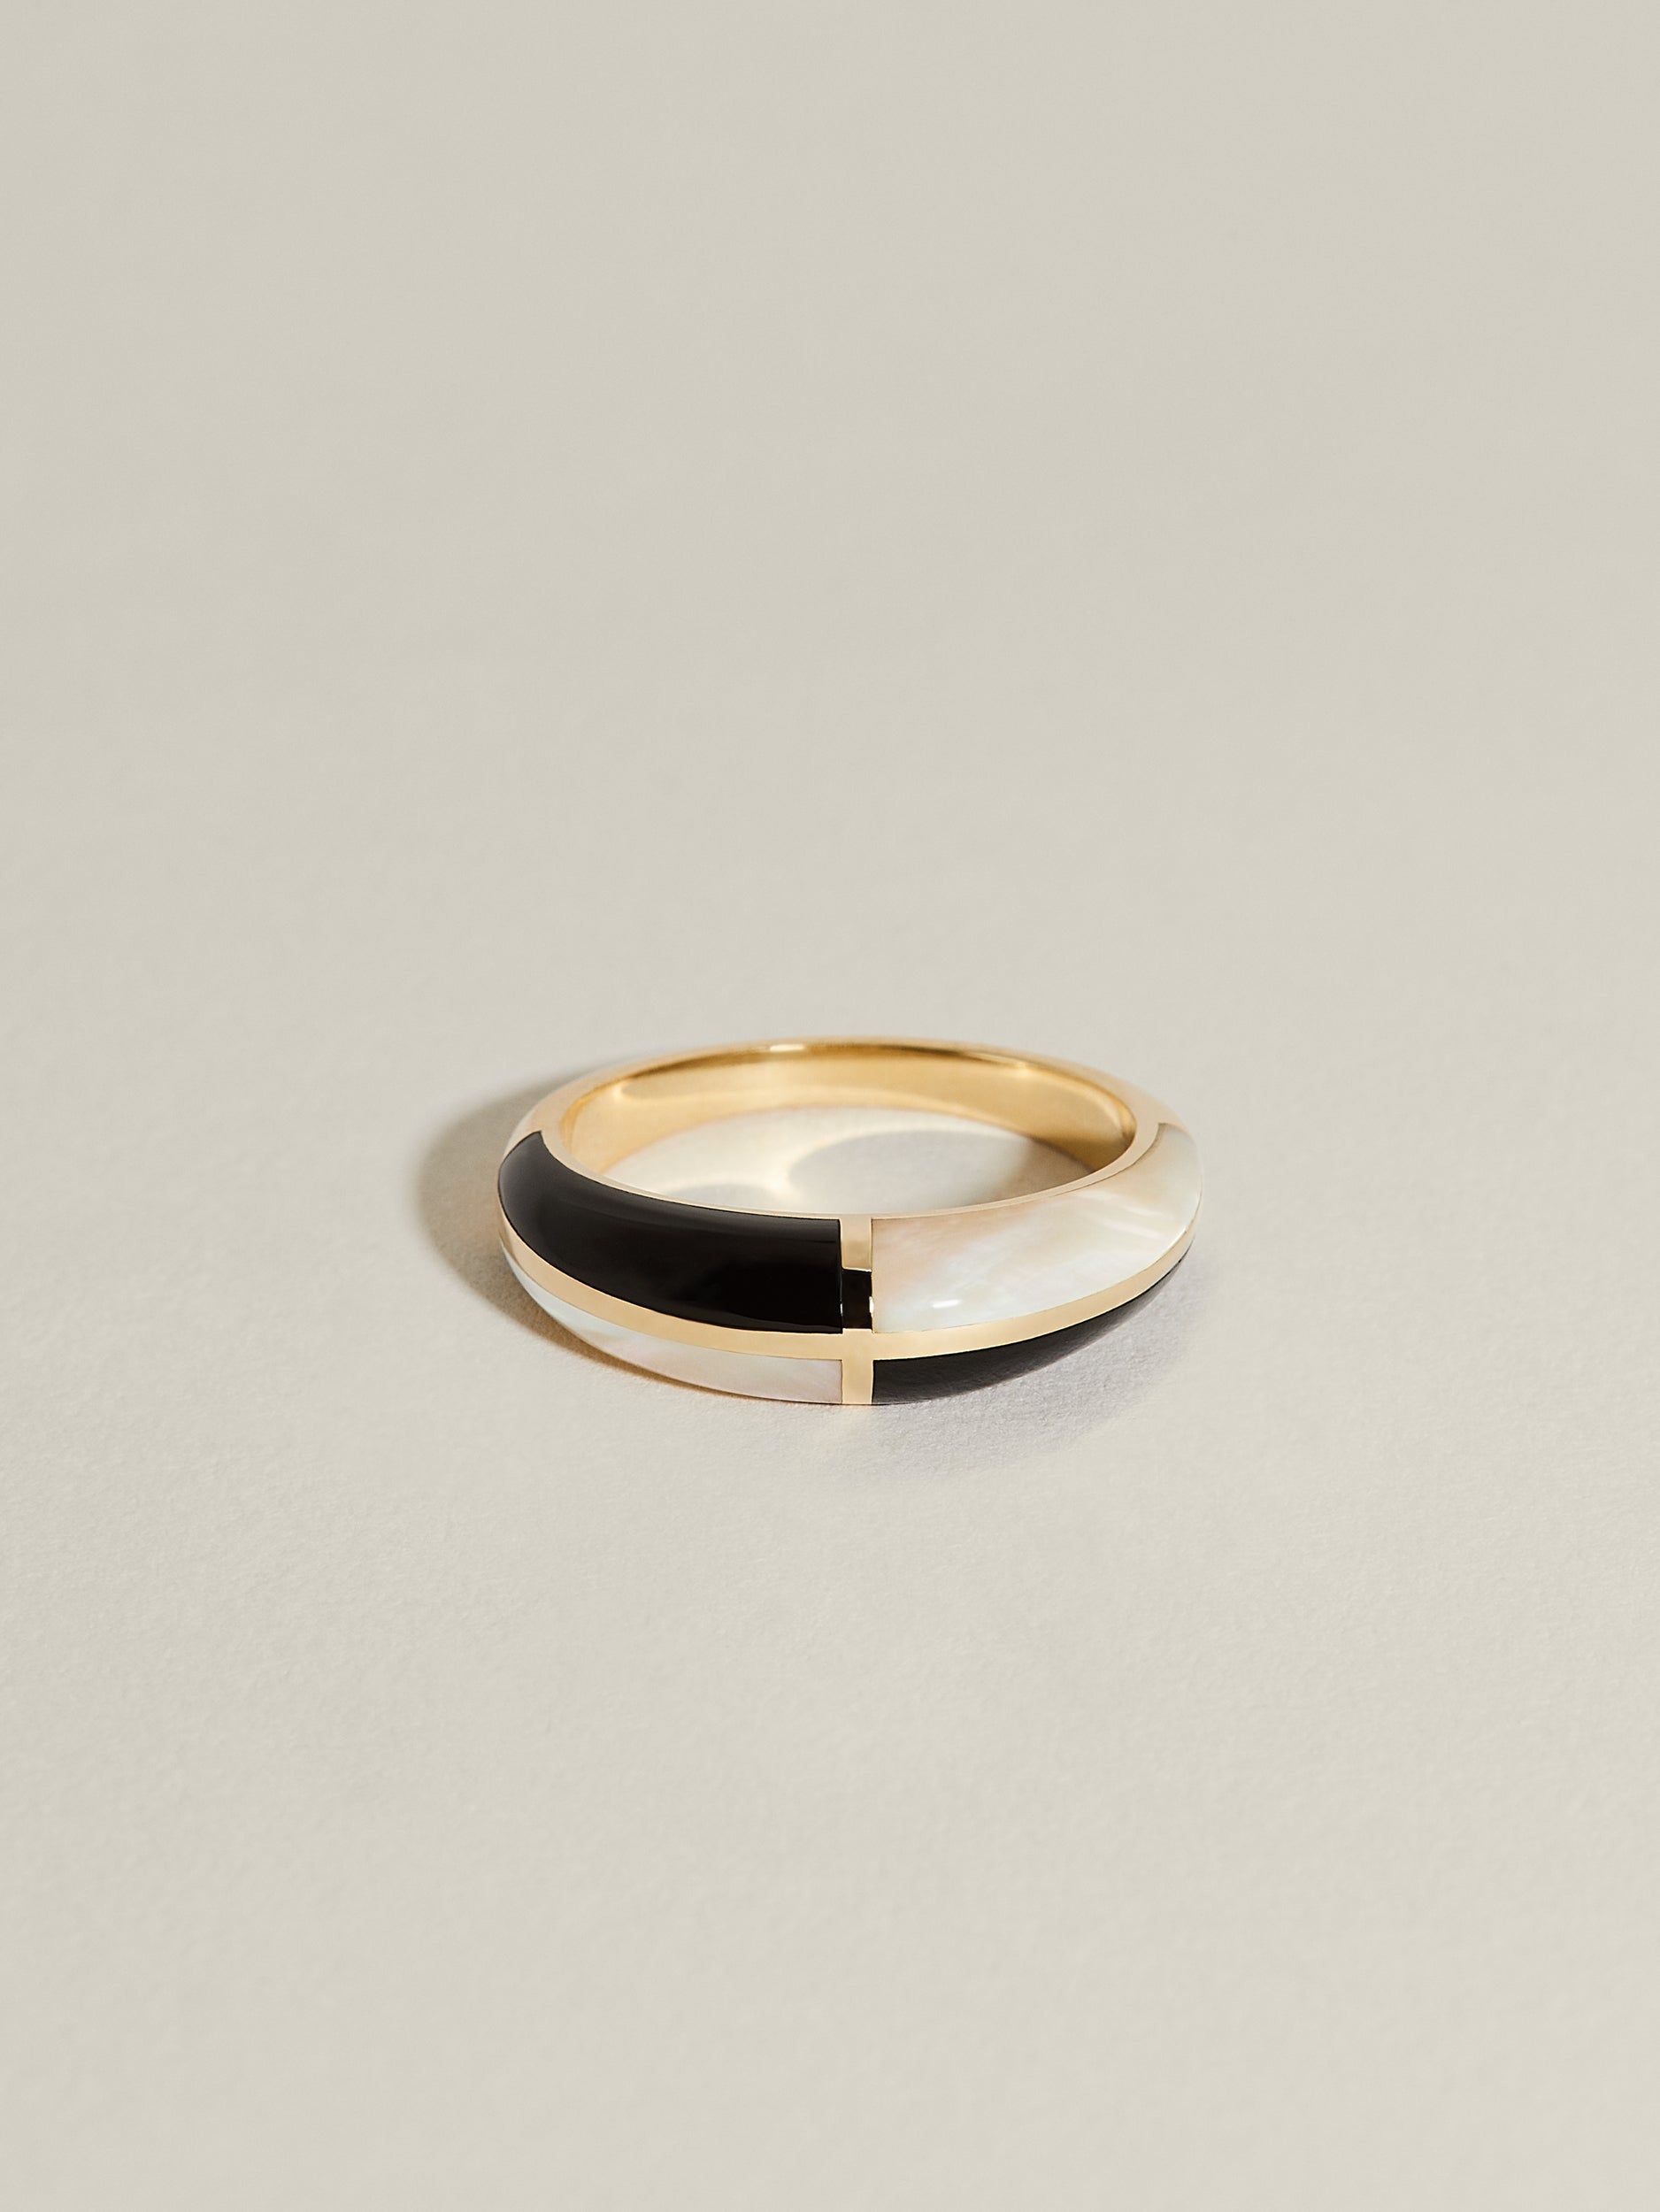 Get the perfect match to your standard with onyx ring